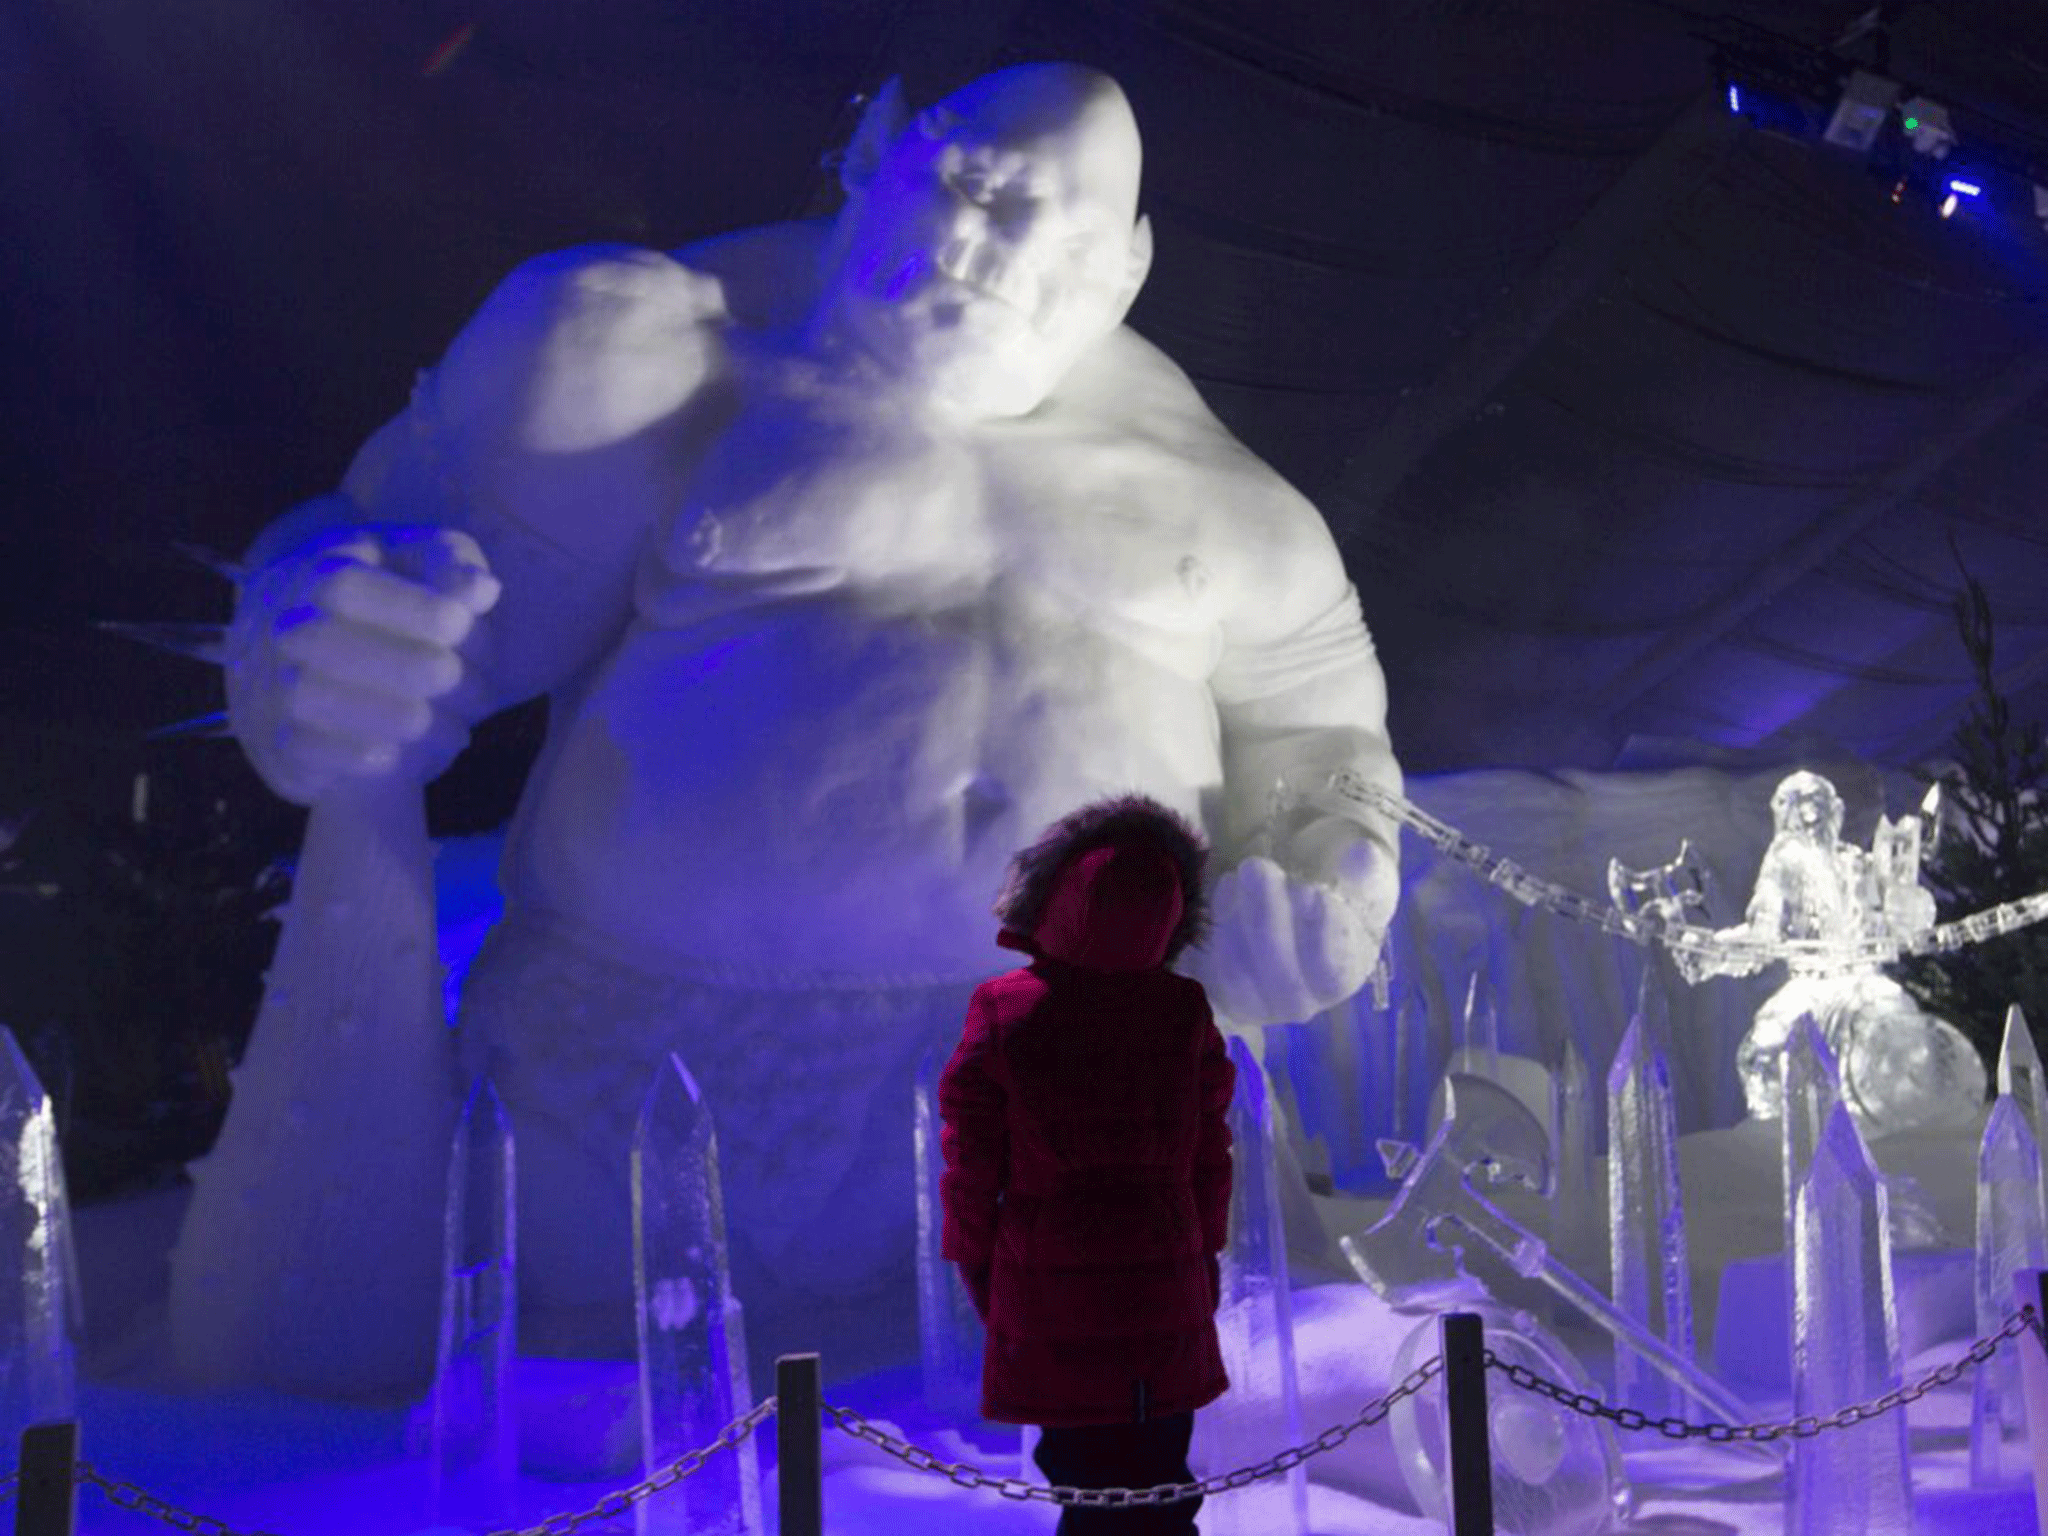 Winter Wonderland on X: Admire the spectacular #ice #sculptures in The  Magical Ice Kingdom!   / X